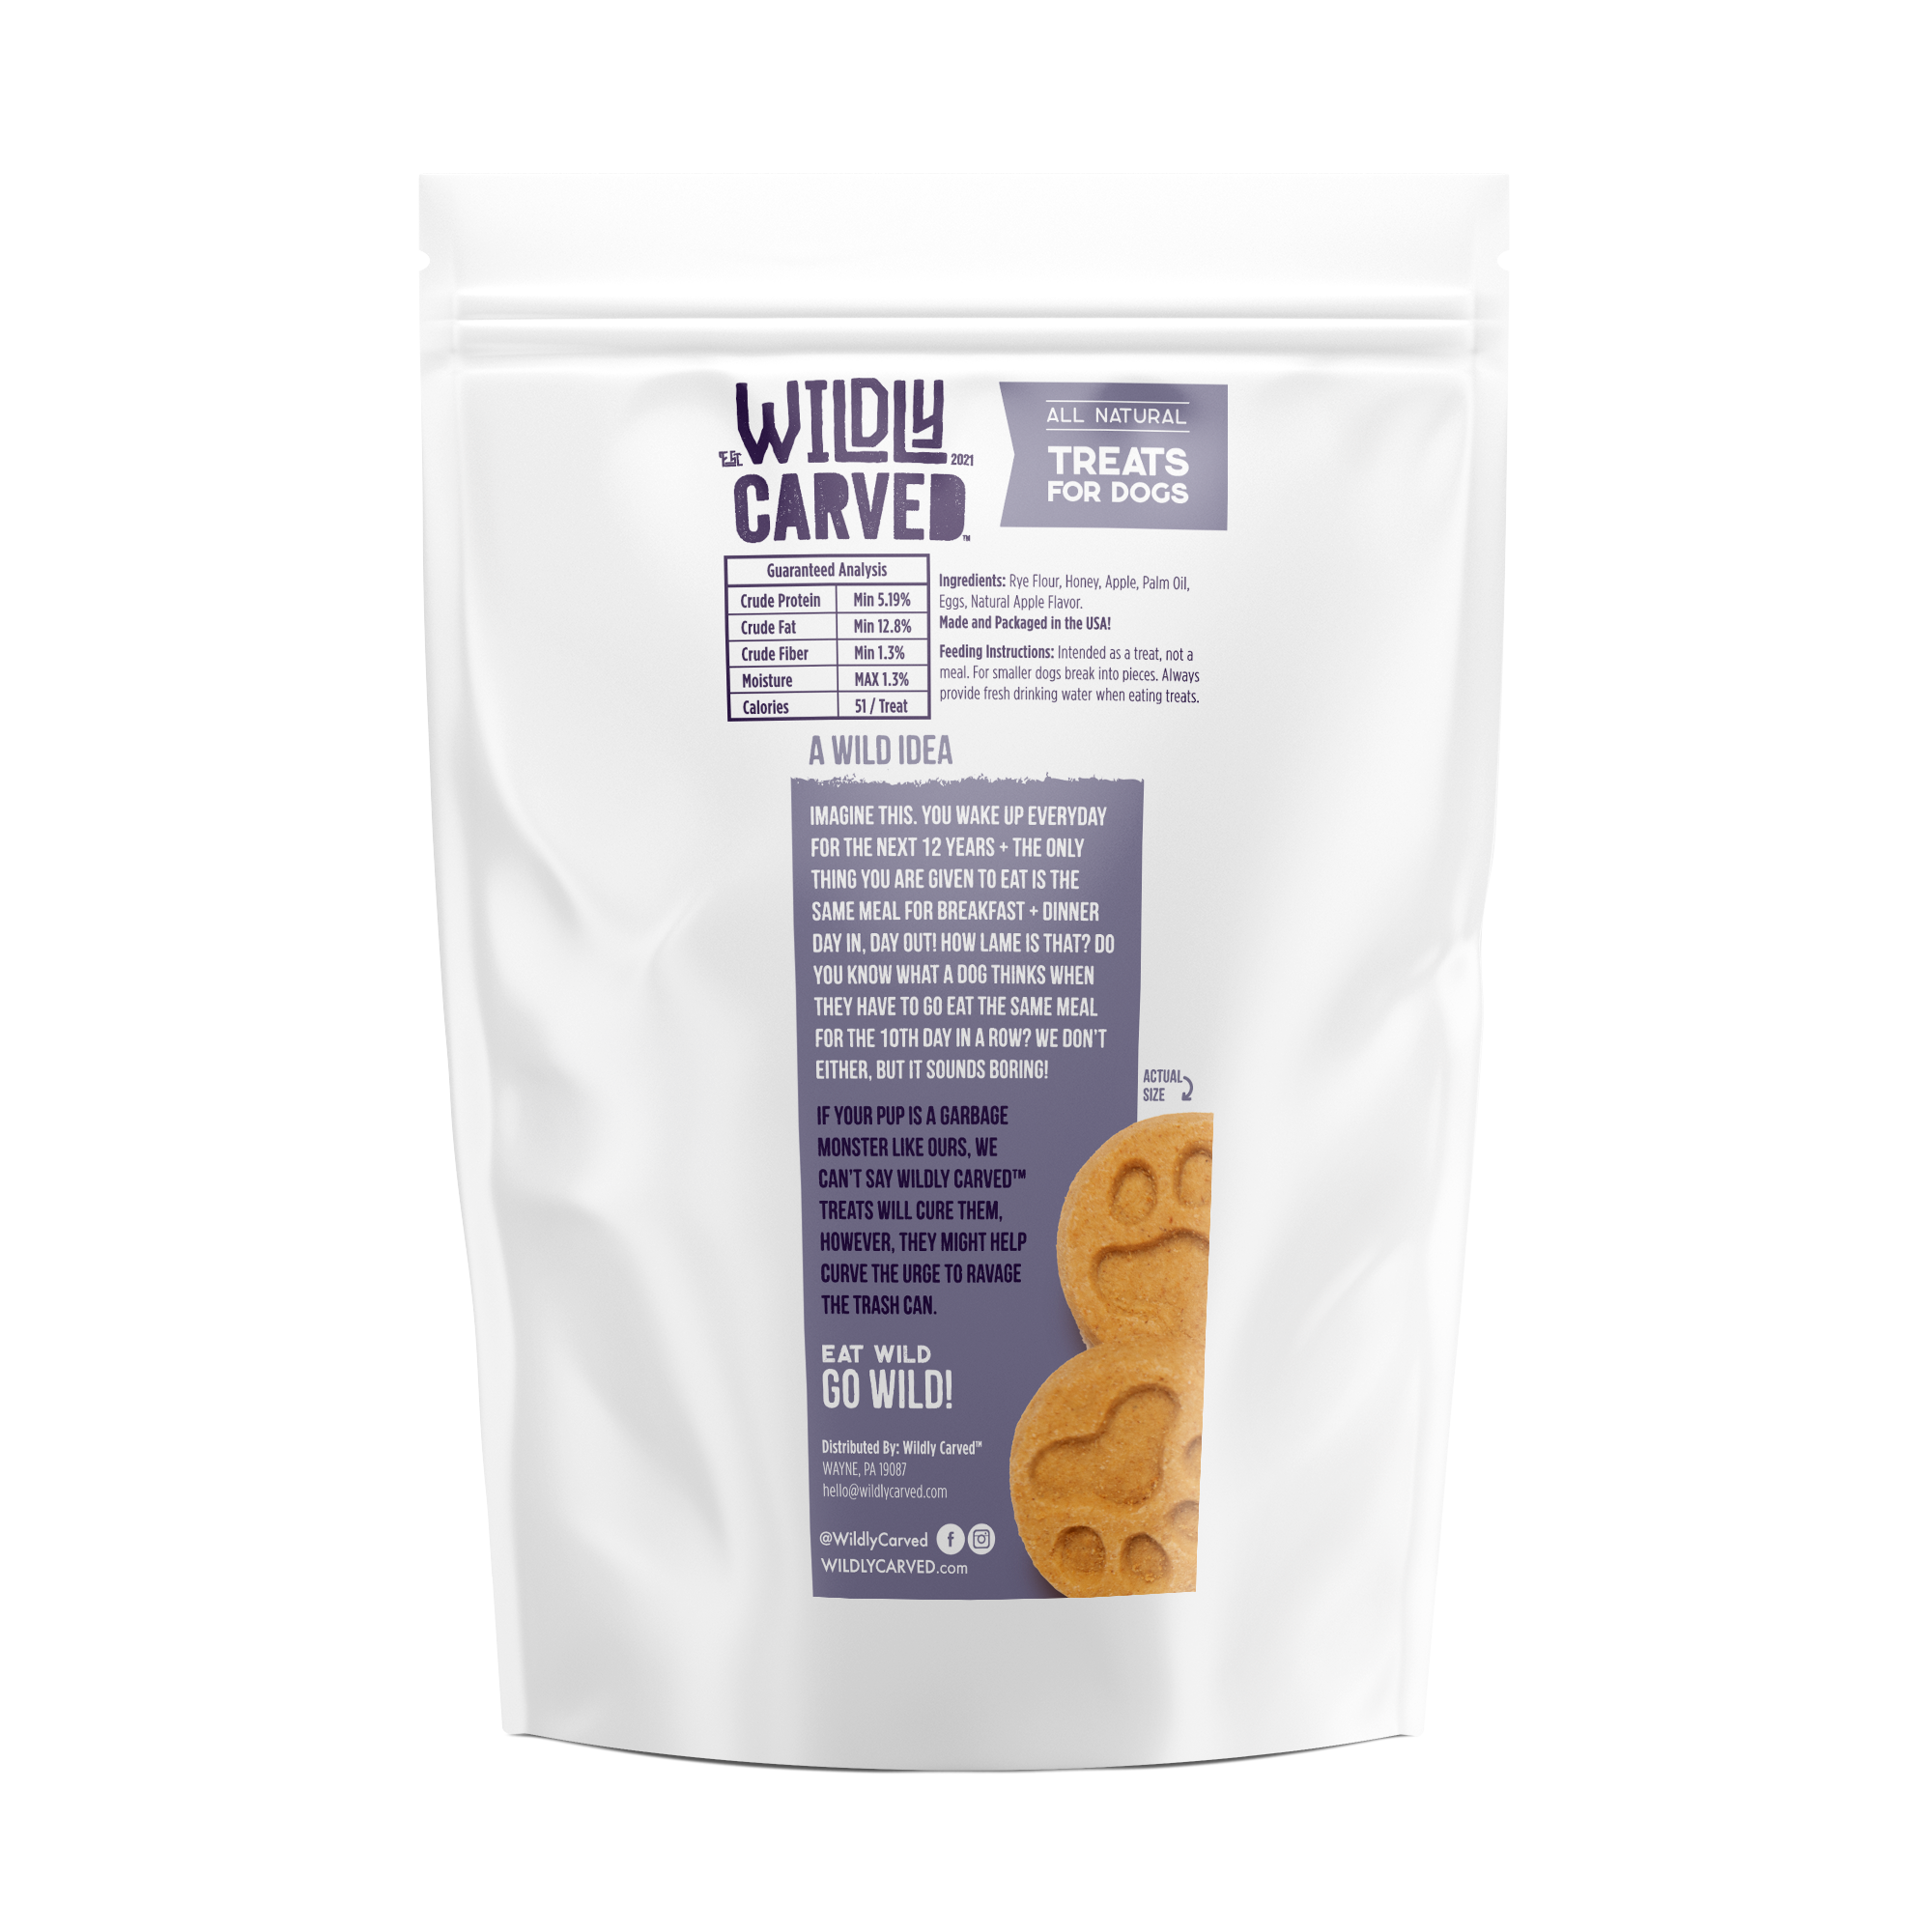 Wildly Carved Human-Grade All Natural Apply Honey Dog Treats